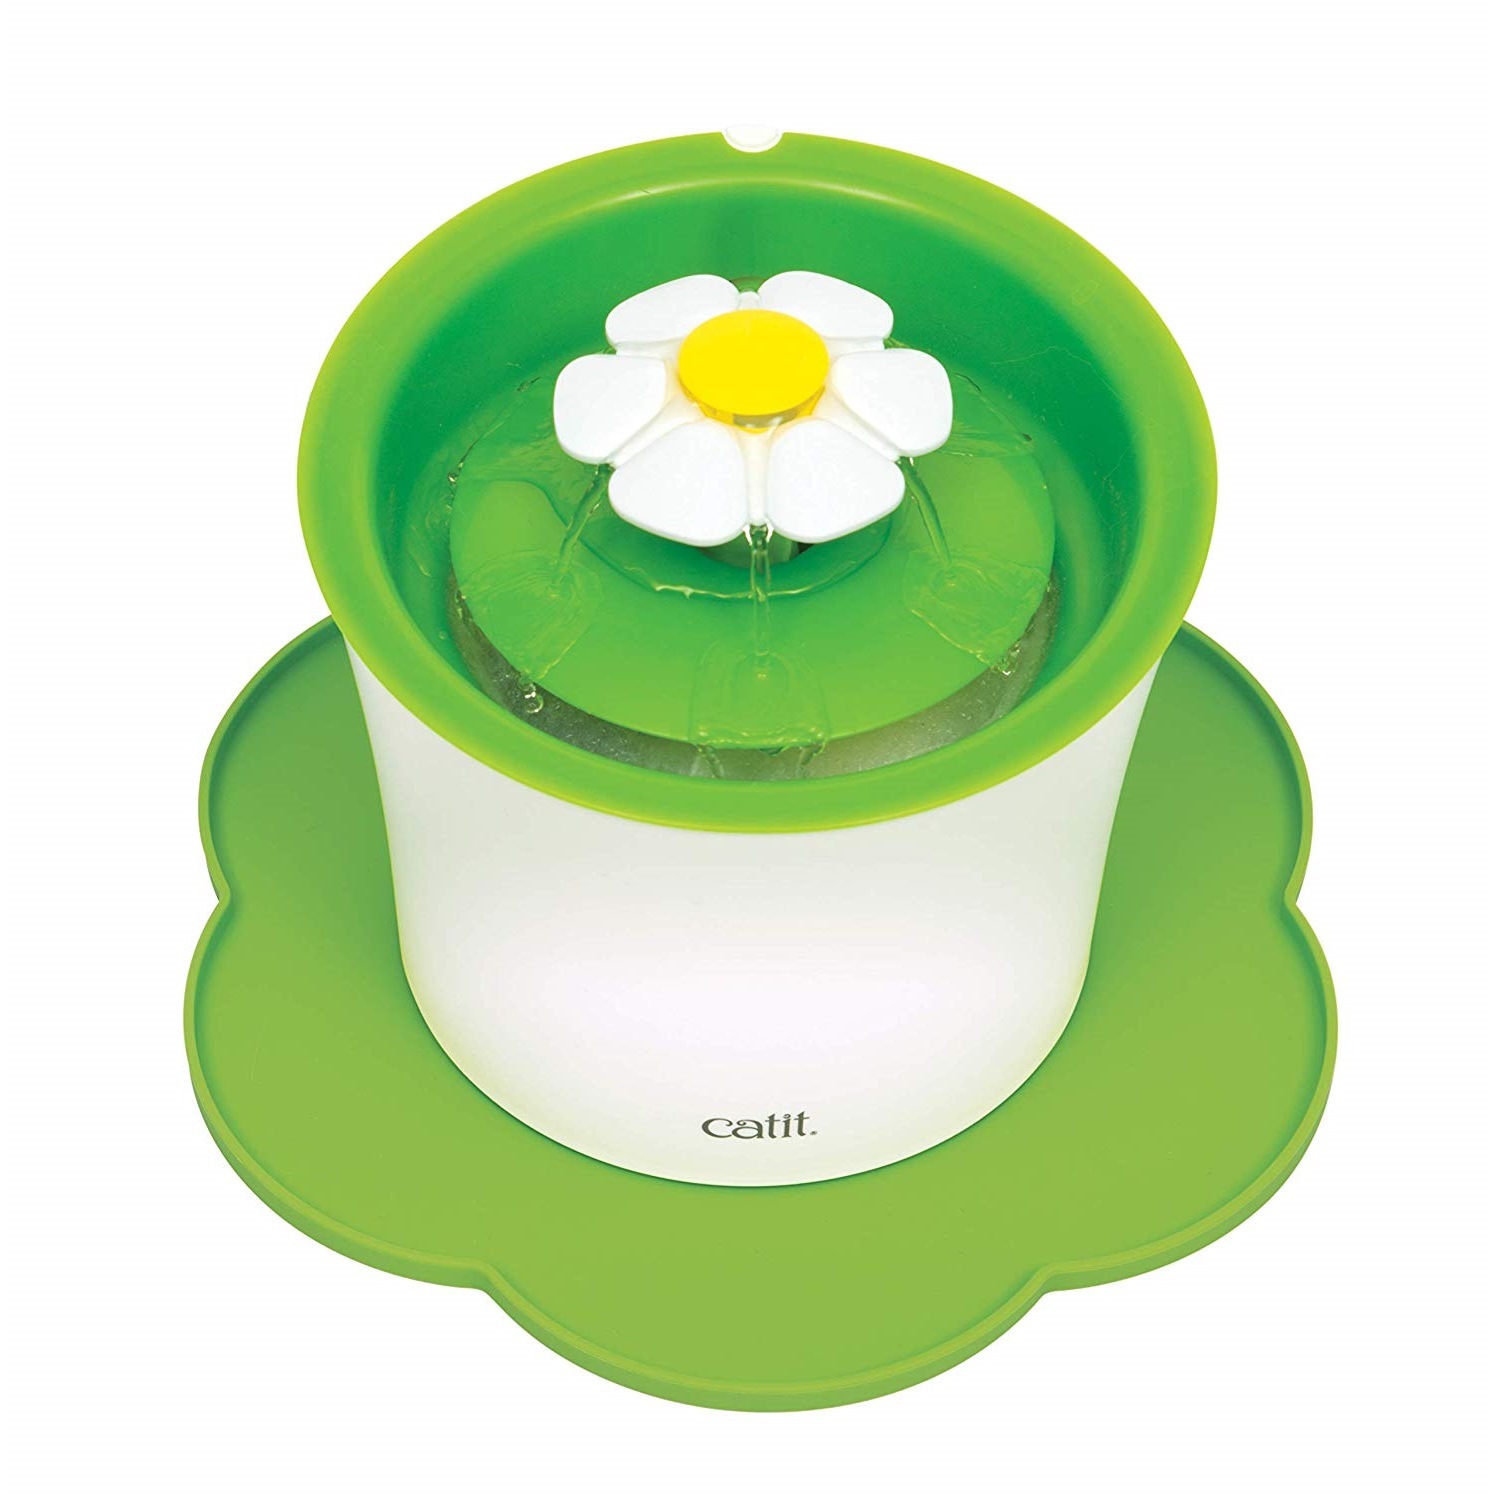 Catit Flower Shaped Silicone Placemat to Stop Spills image 0